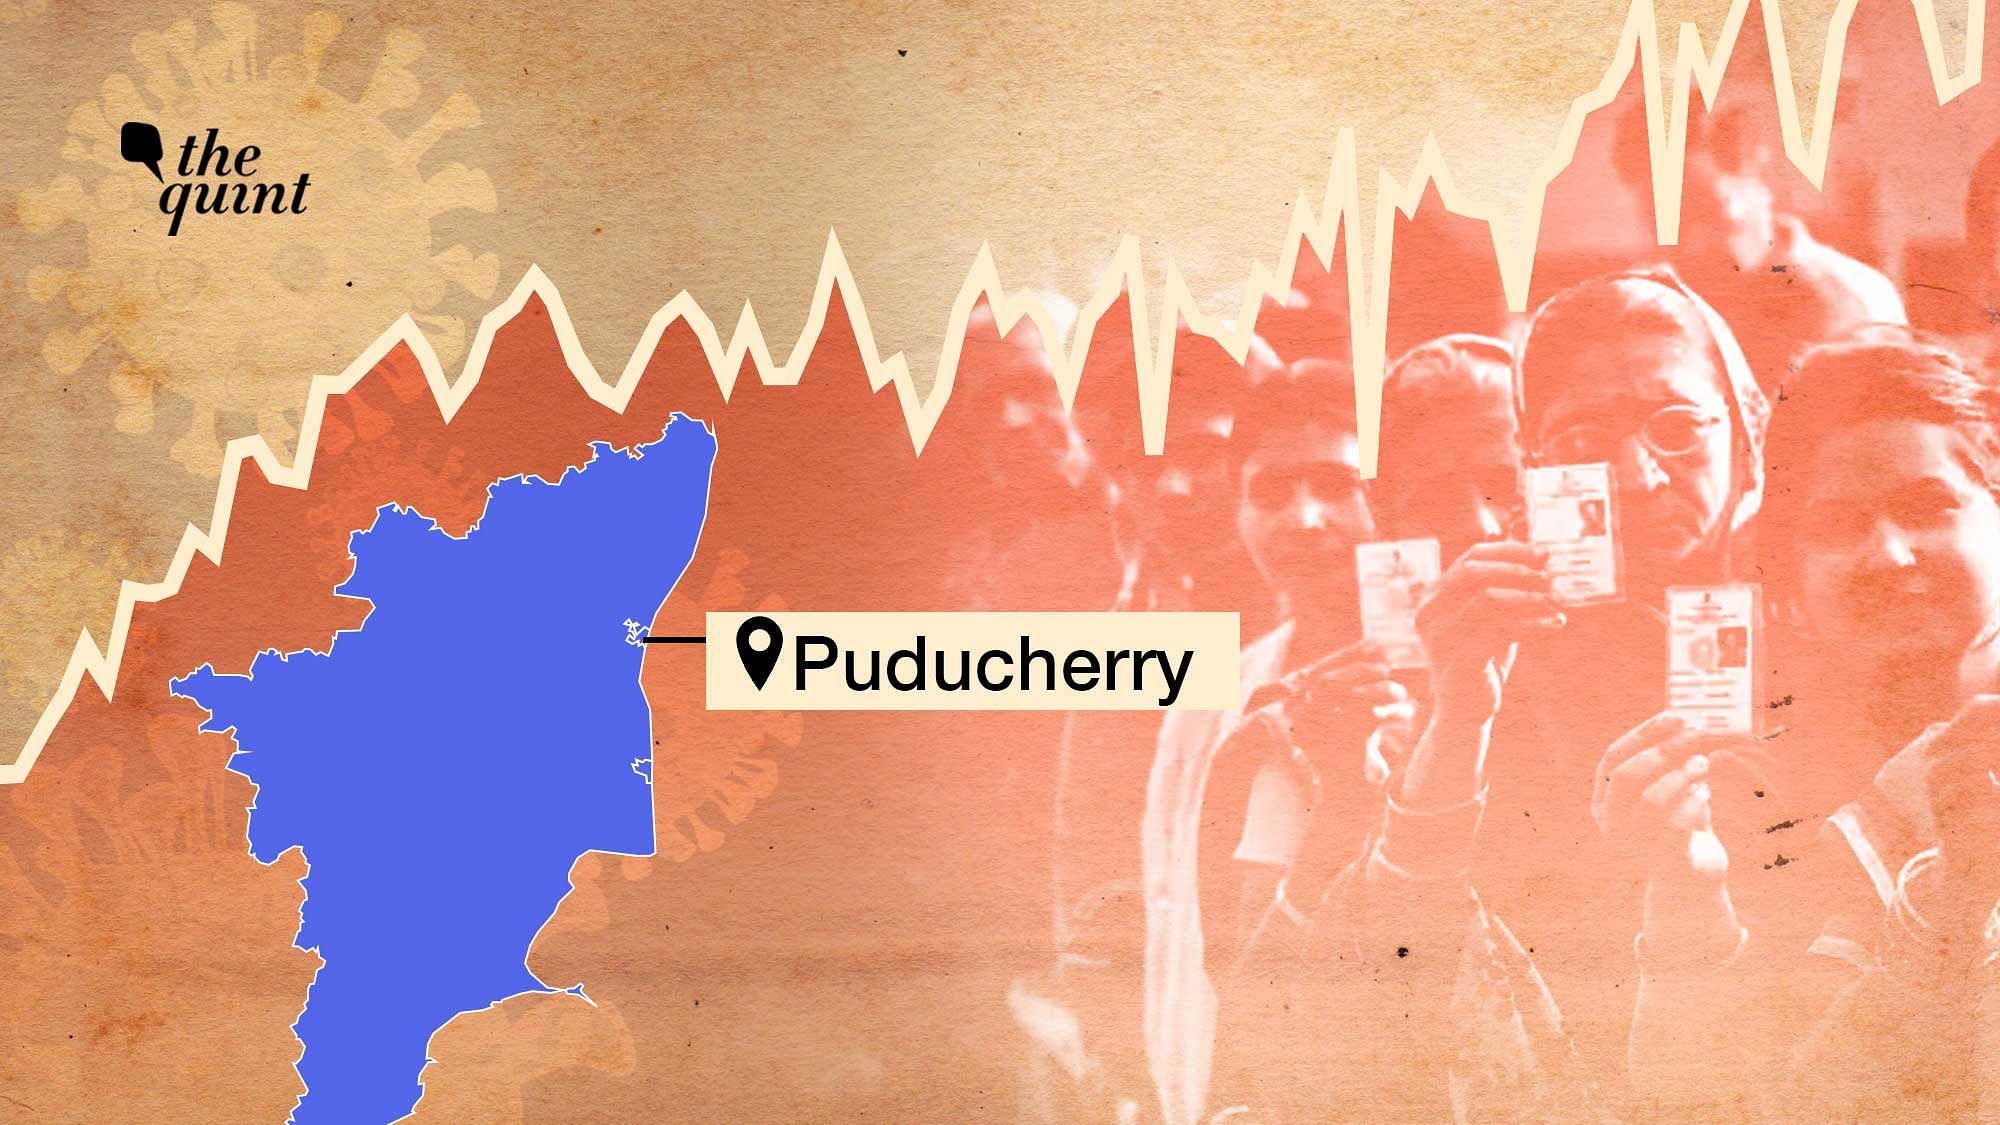 The recovery rate of Puducherry is 88.8% which is higher than the national average of 86%.